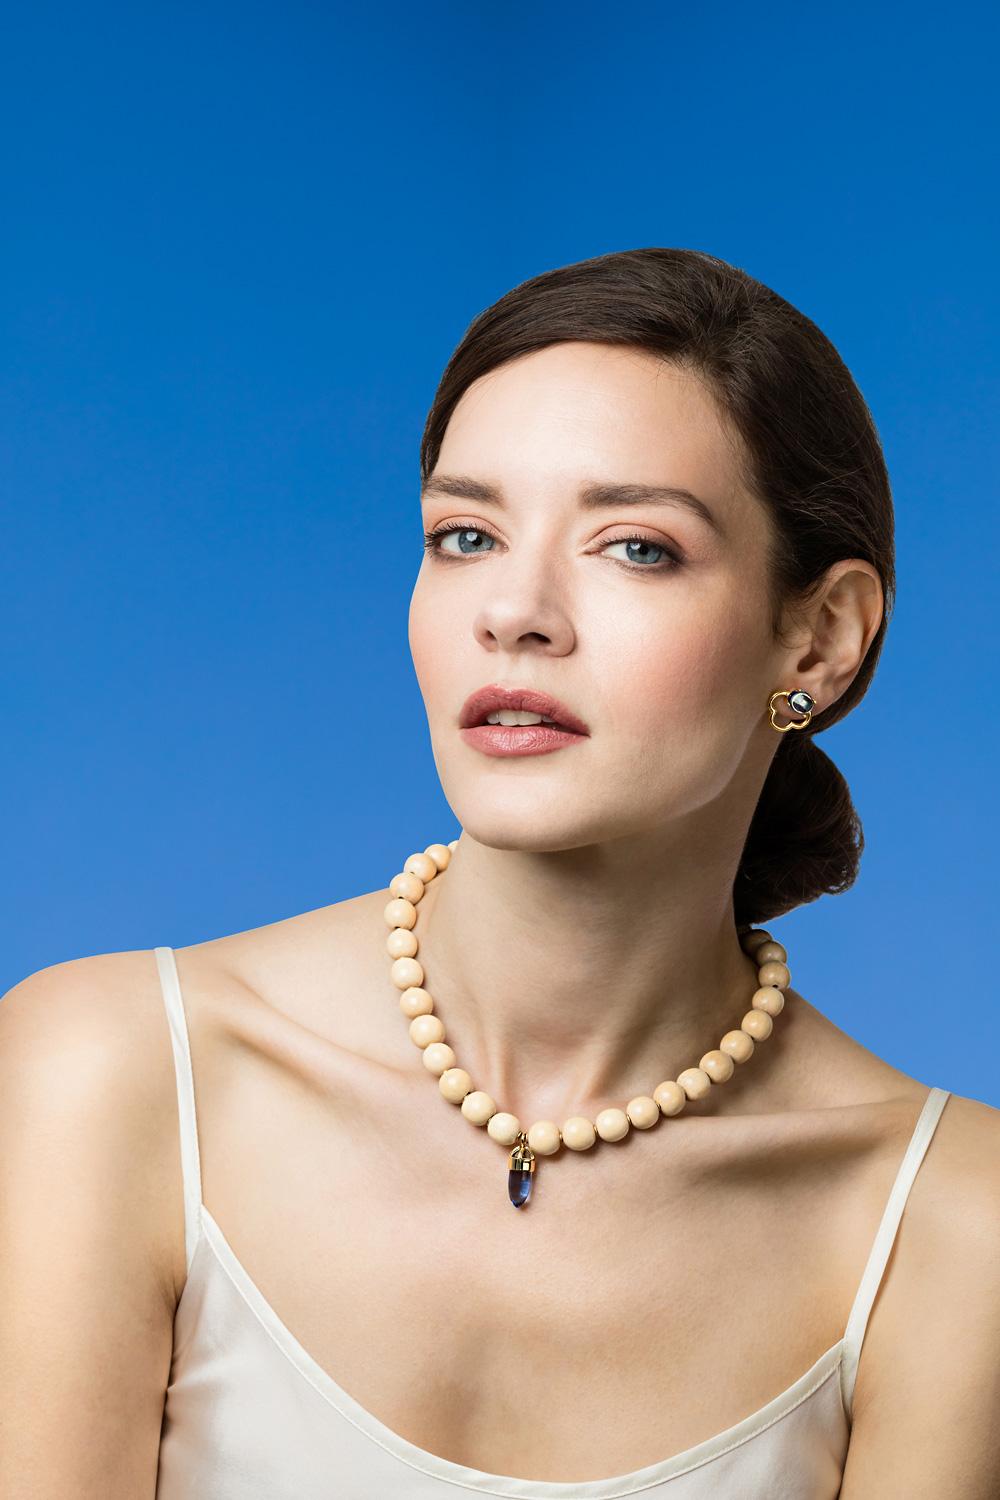 New to the Maviada Collection, our contemporary and very stylish wooden necklaces with 18k gold discs interspersed between each 12mm natural round bead, gives this necklace a playful yet luxurious look. Each necklace measures 40cm. They come in